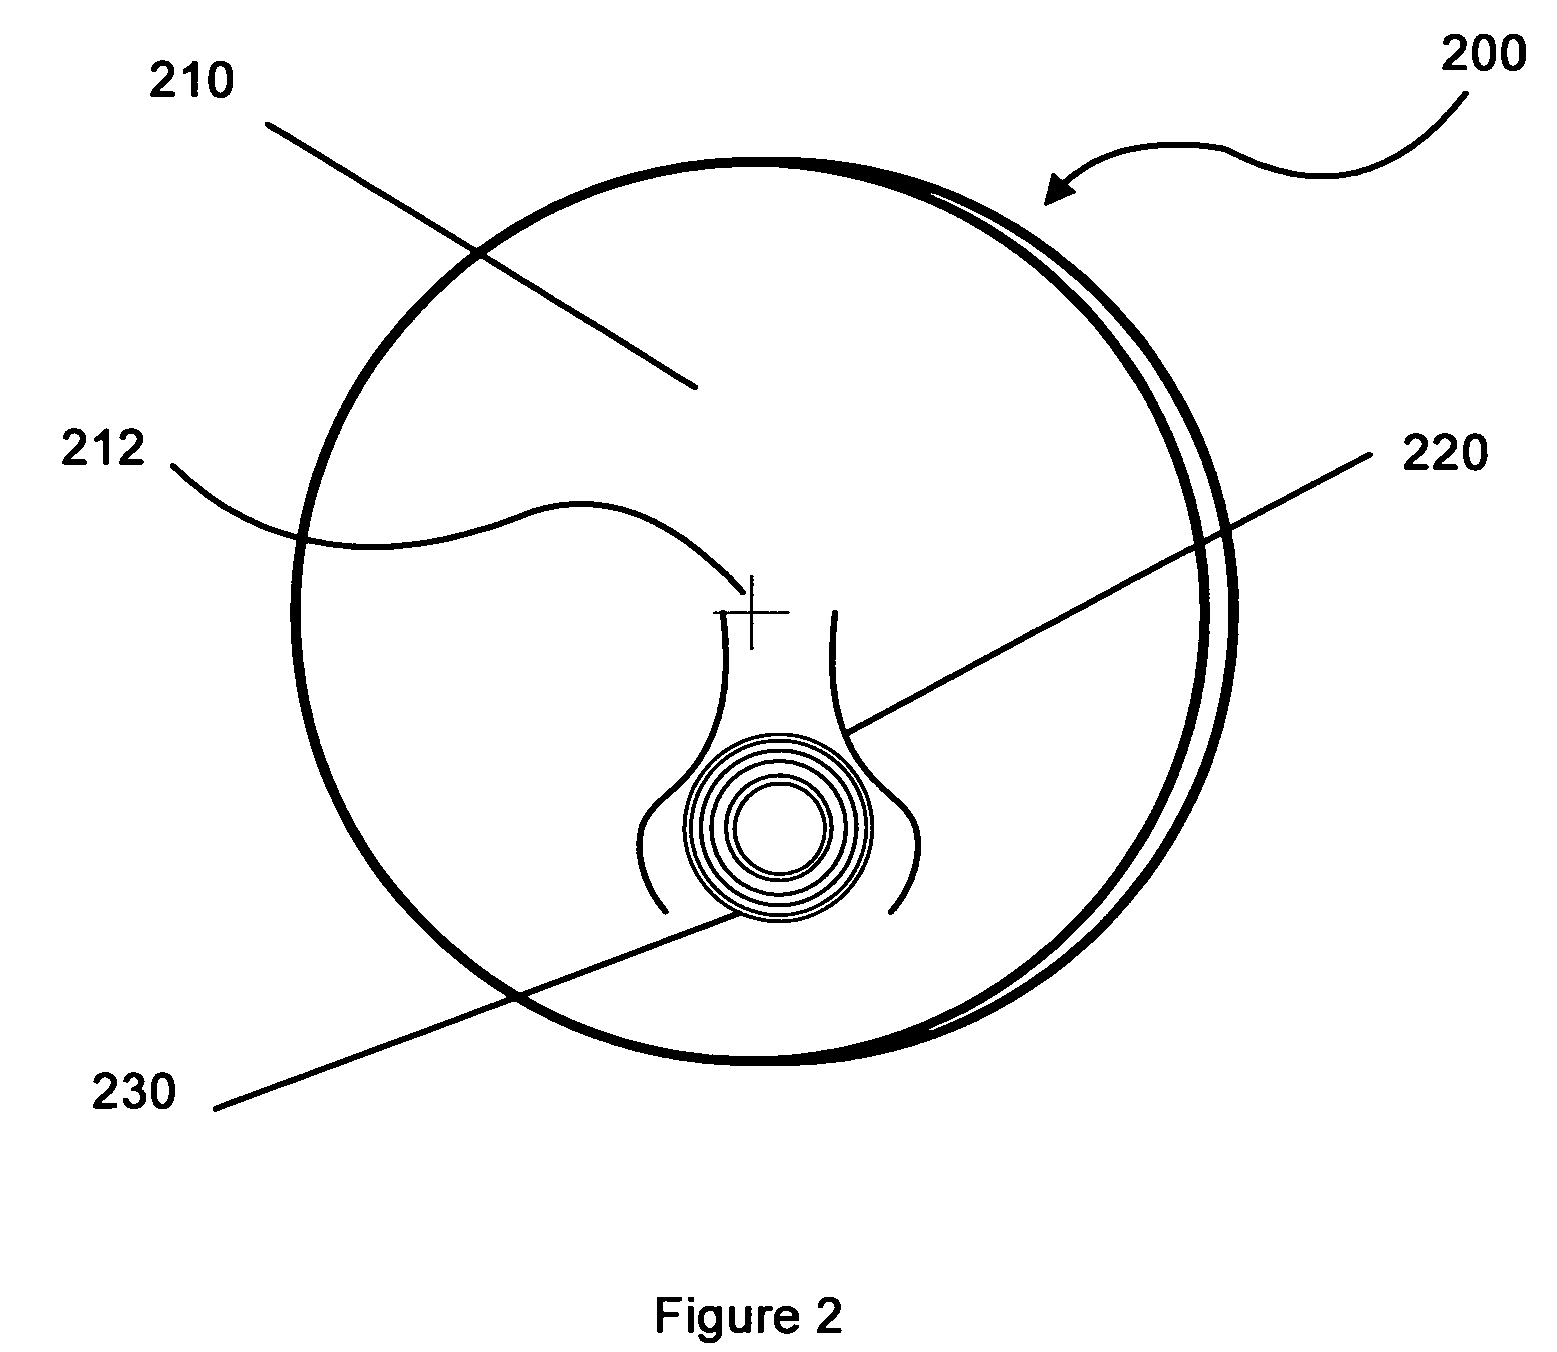 Ophthalmic lenses incorporating a diffractive element